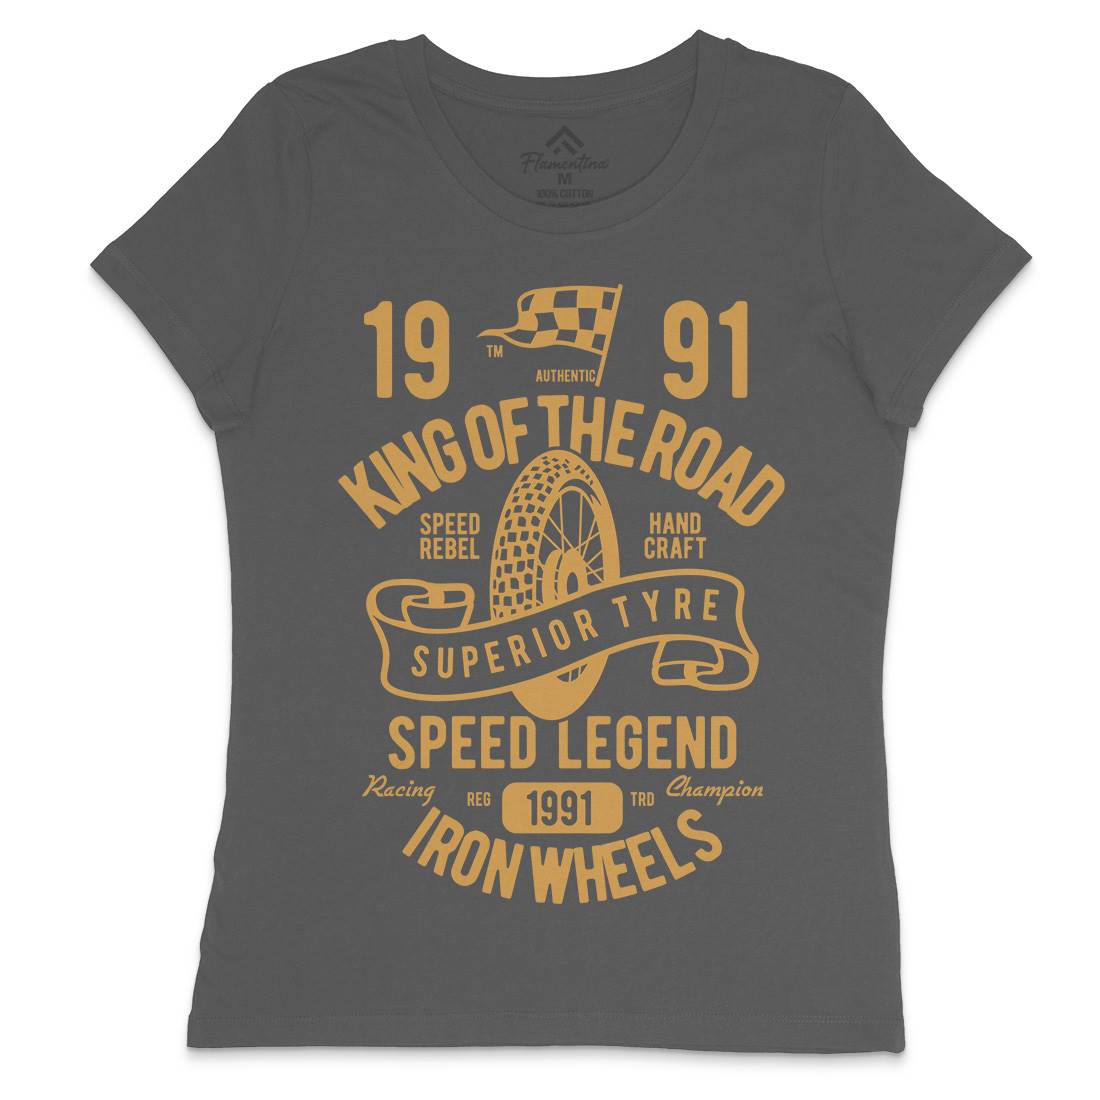 Superior Tyre King Of The Road Womens Crew Neck T-Shirt Motorcycles B458